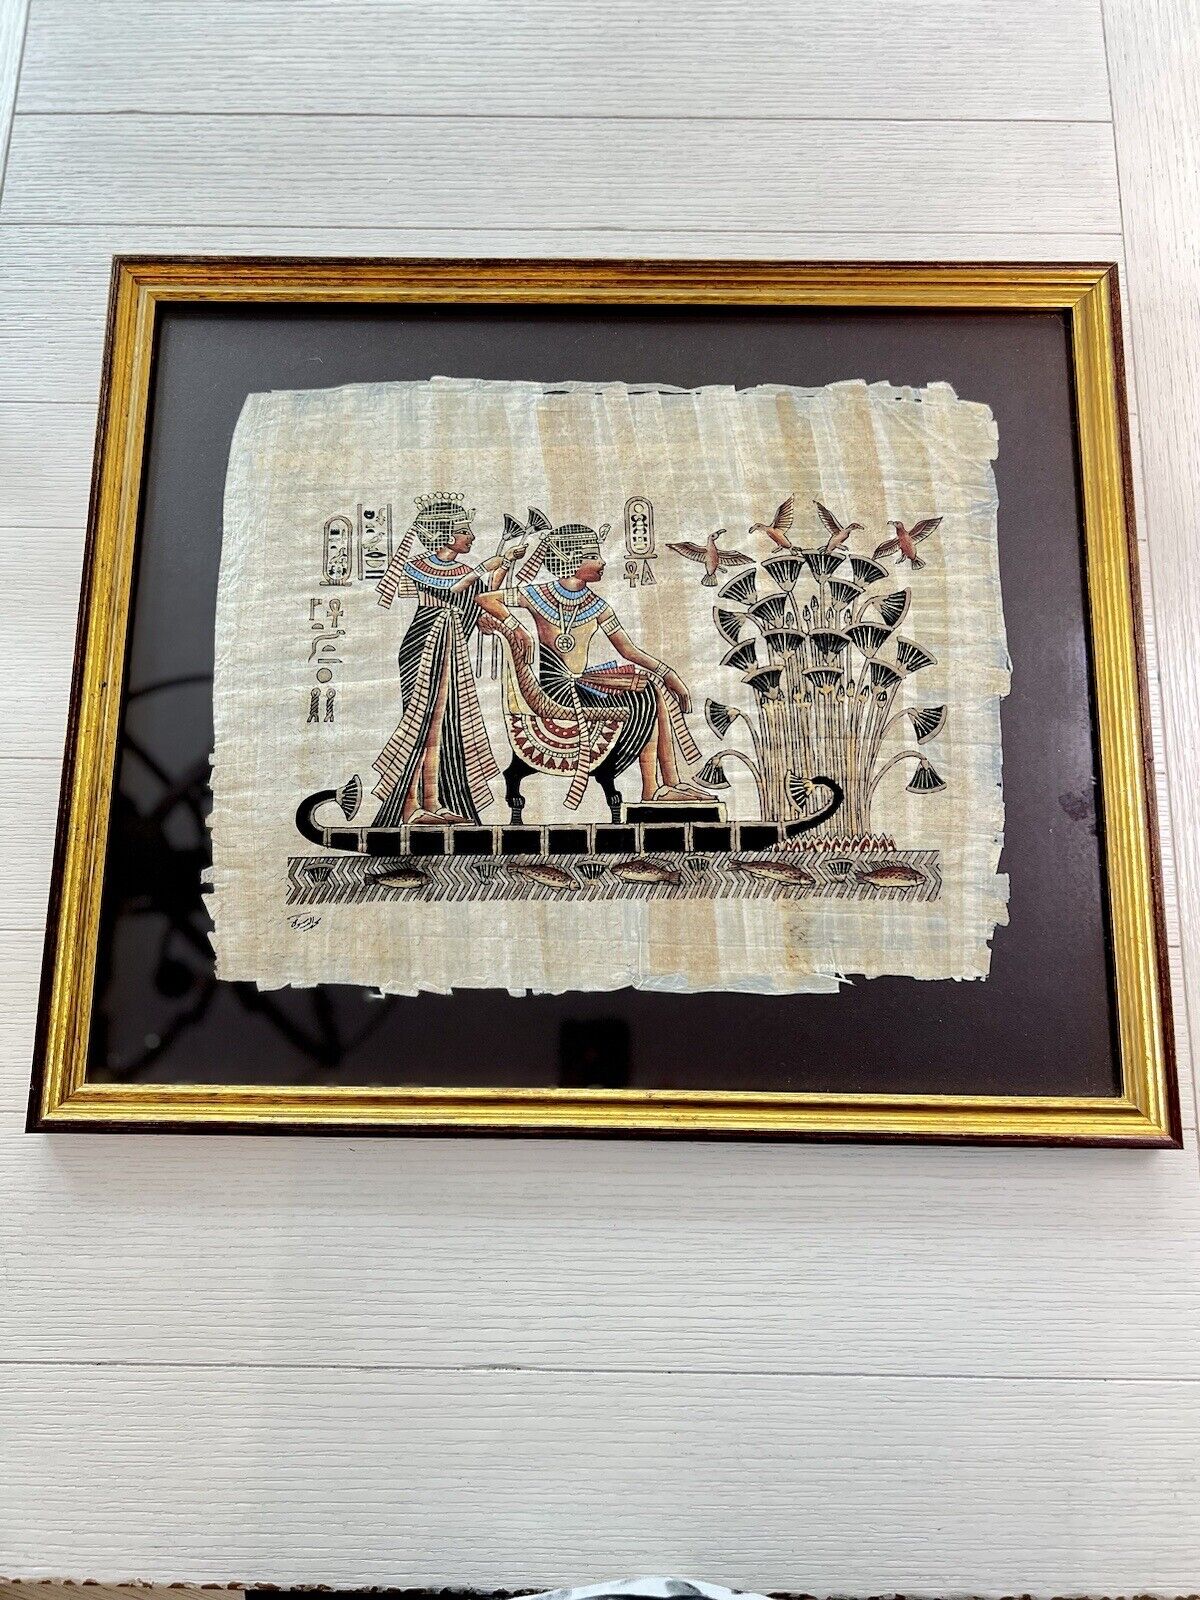 Hand Painted Egyptian Art Of Royals On Papyrus Signed&Custom Framed 19.5” x 23”